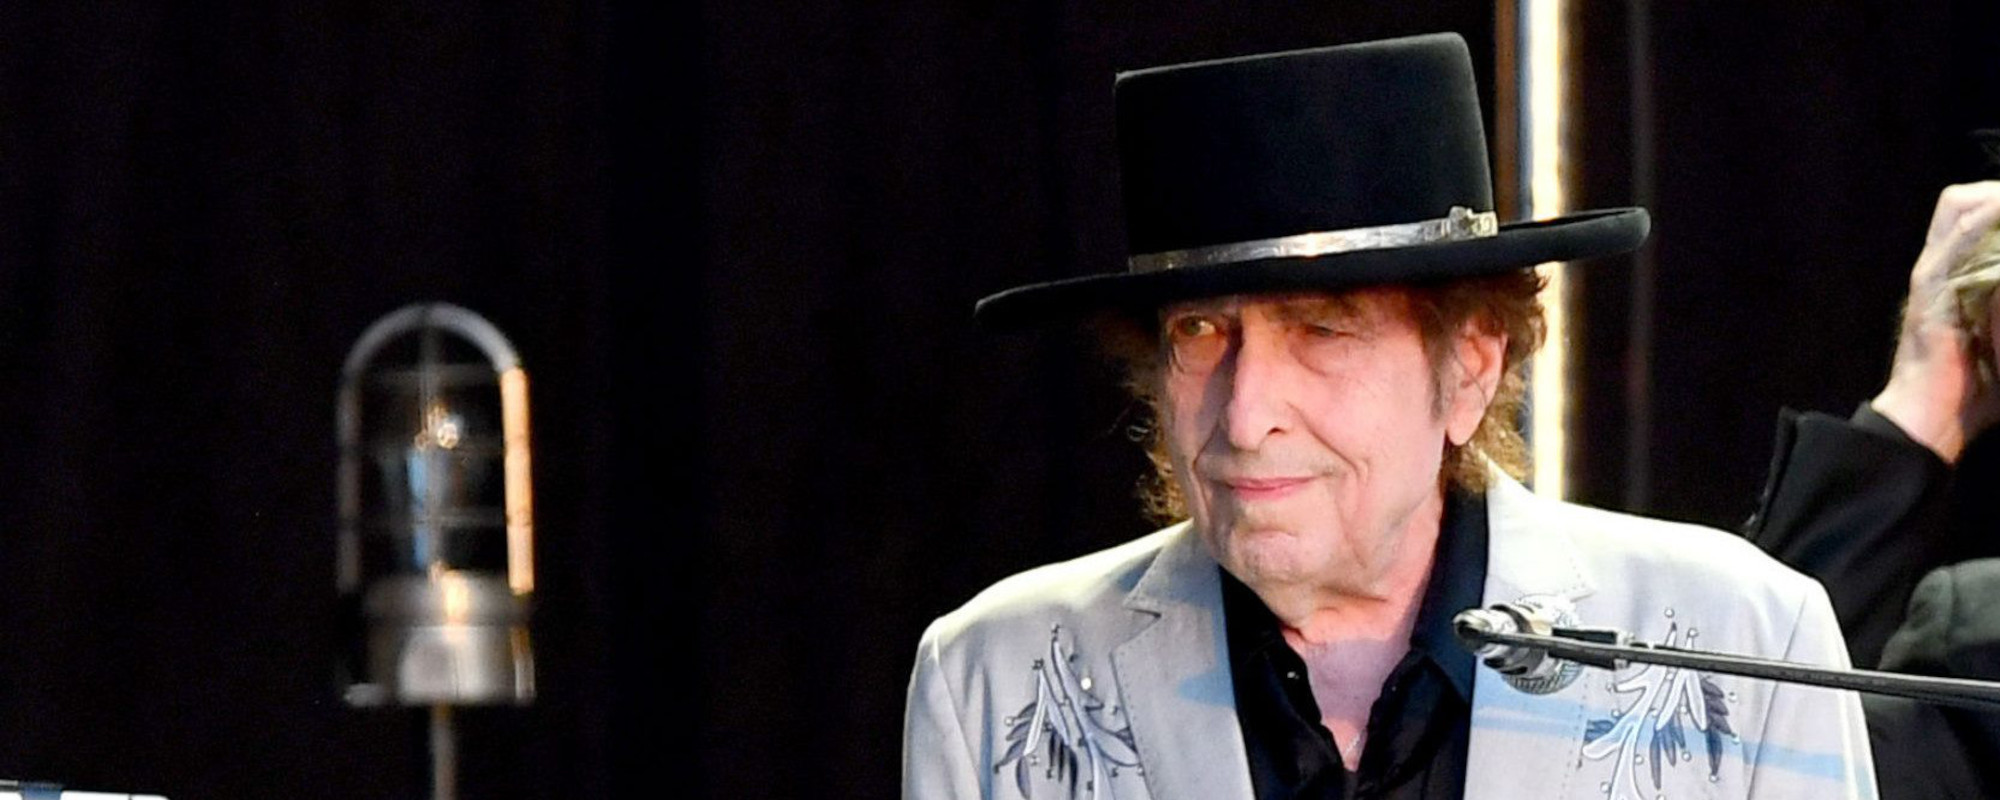 Bob Dylan Sells Complete Catalog of Recorded Music to Sony for $150 Million